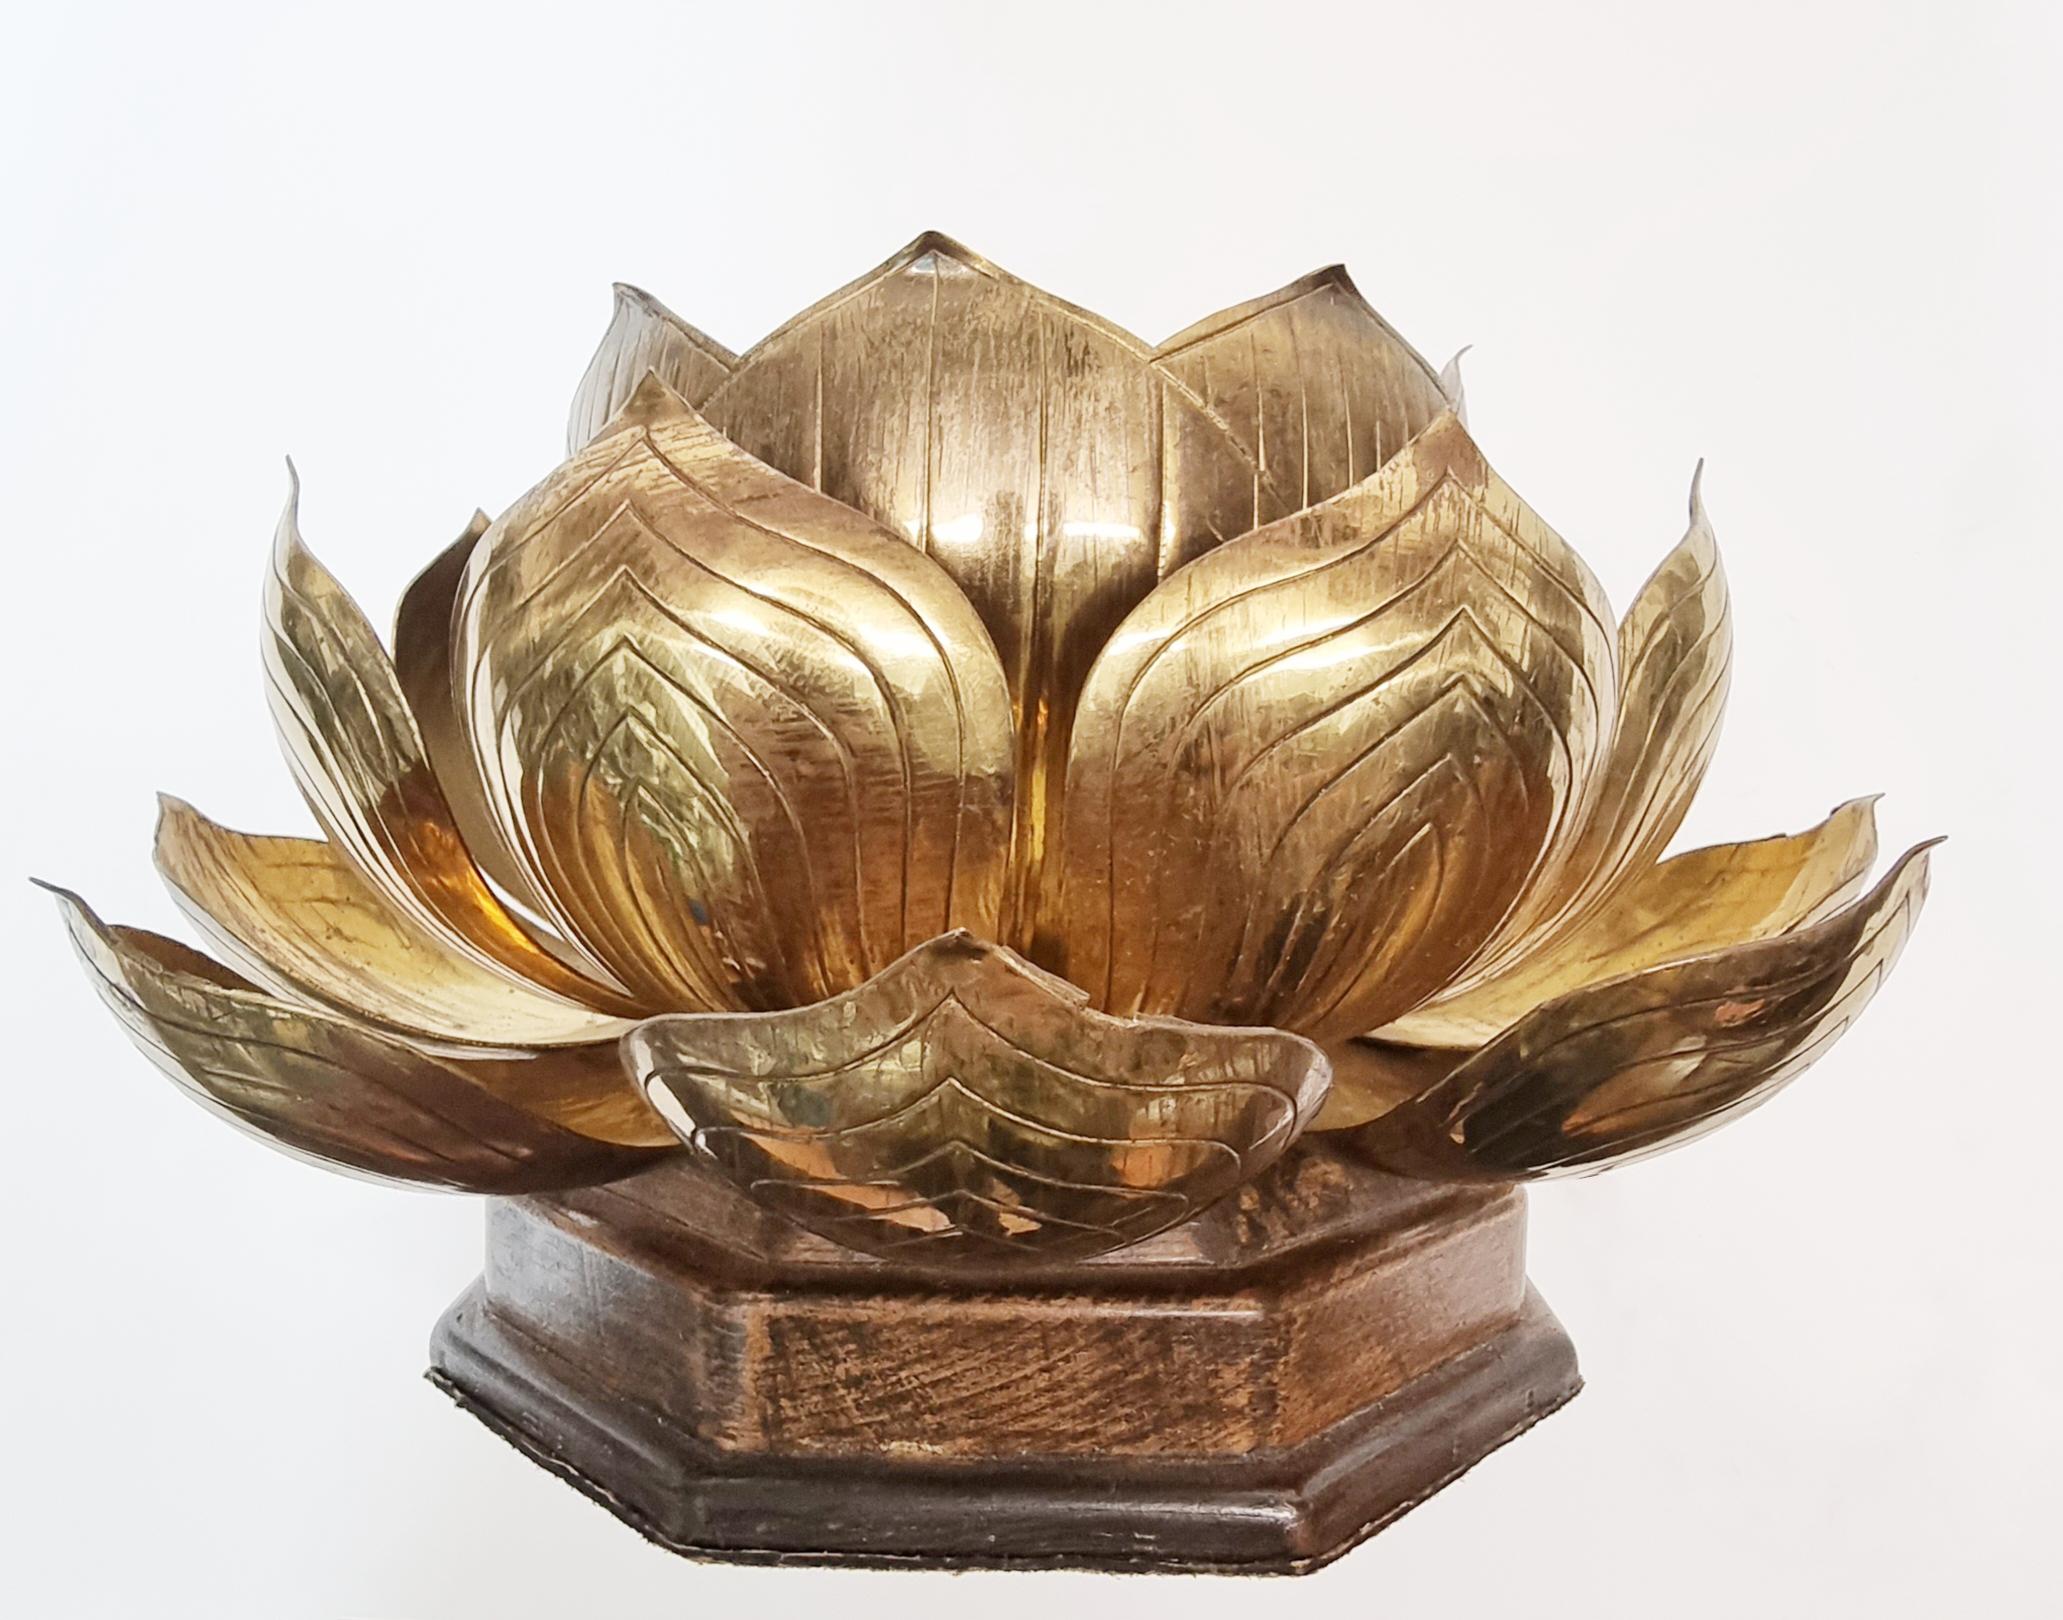 Feldman Brass Lotus Table Lamp
Mid century modern style.

Manufactured by Feldman Lighting, Los Angeles, USA, 1960s.

Brass blooming brass lotus form
Over octagonal shaped wooden plinth. Porcelain socket & cloth wire in good condition.
Could be used